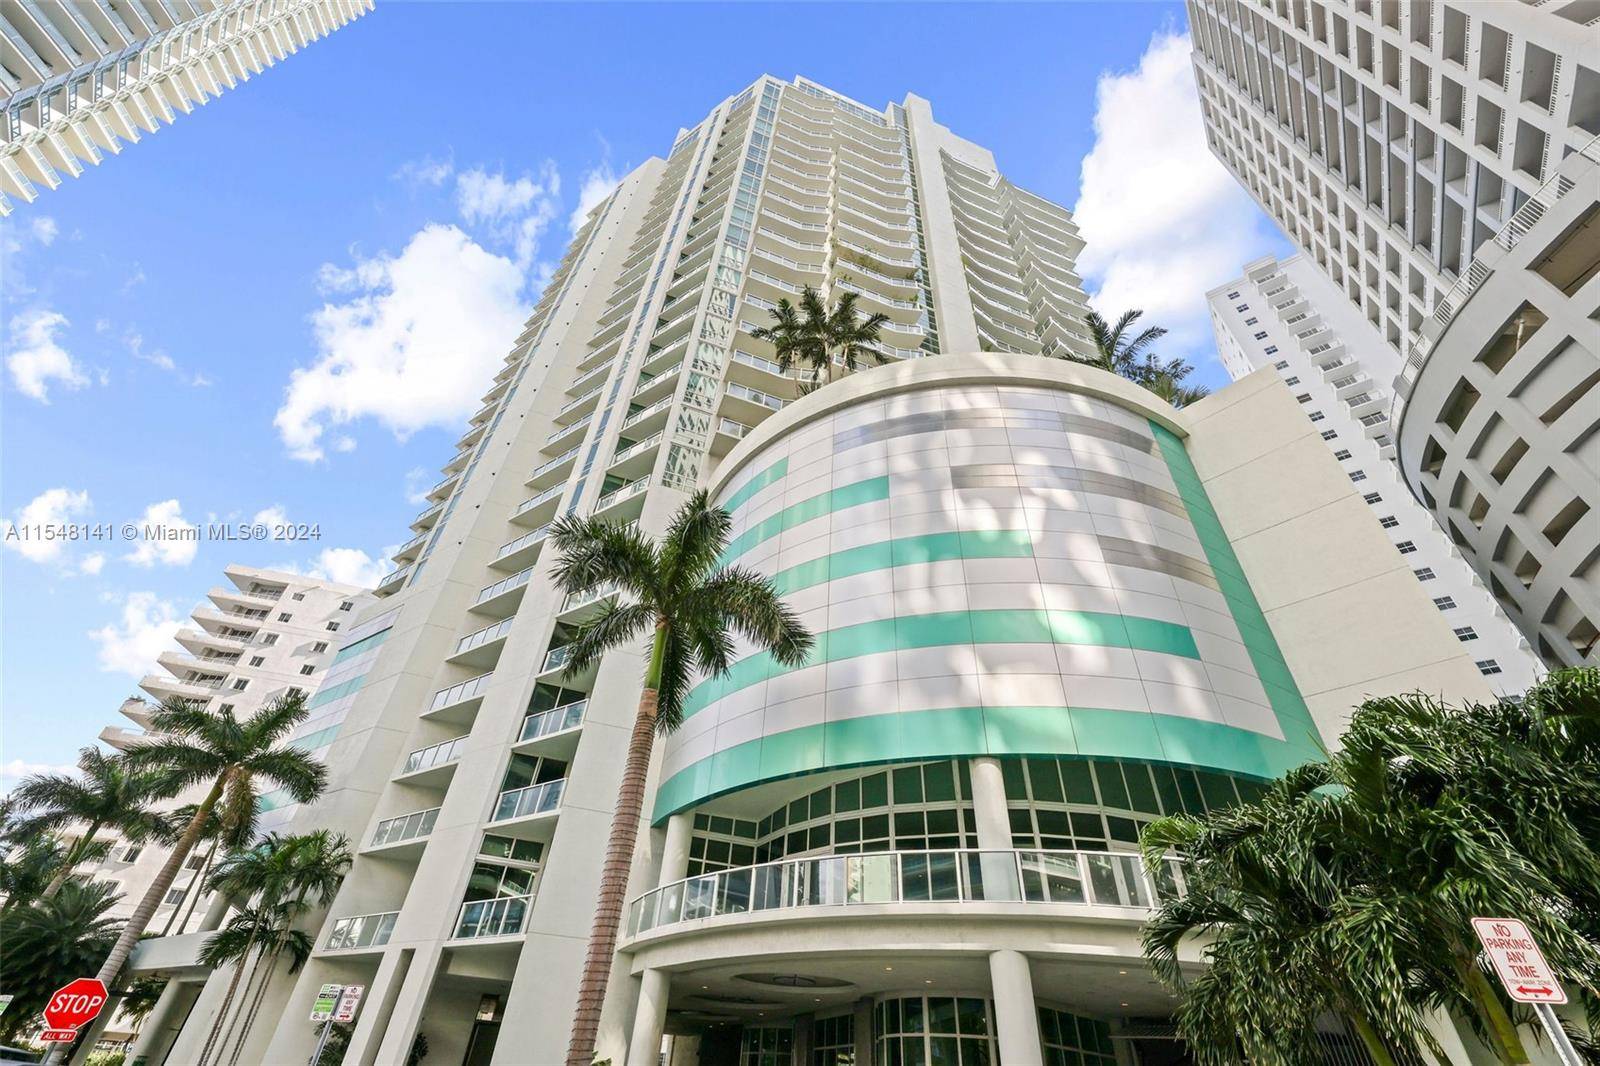 Excellent condition 1 bedroom 1 bath at The Emerald in Brickell.